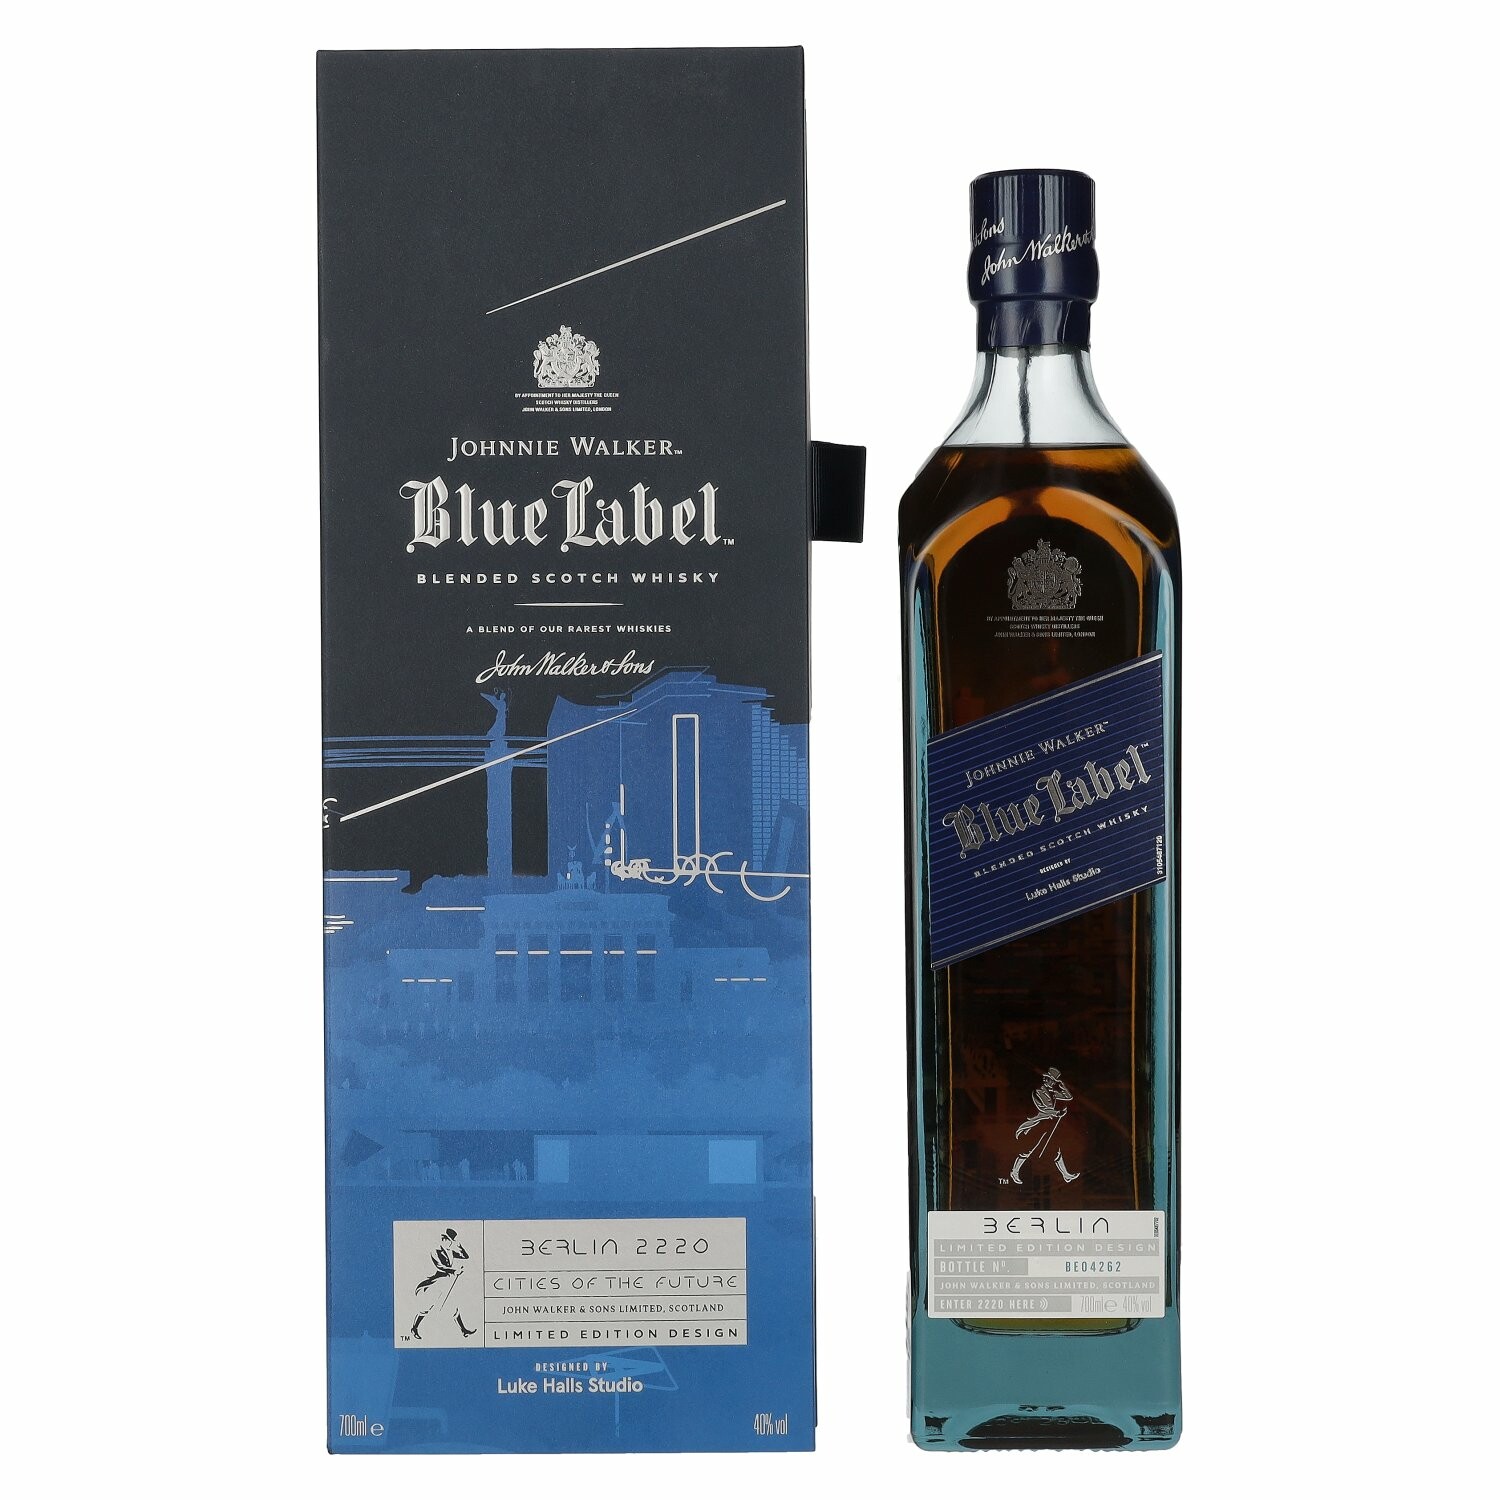 Johnnie Walker Blue Label City Edition Berlin Blended Scotch Whisky 40% Vol. 0,7l in Giftbox